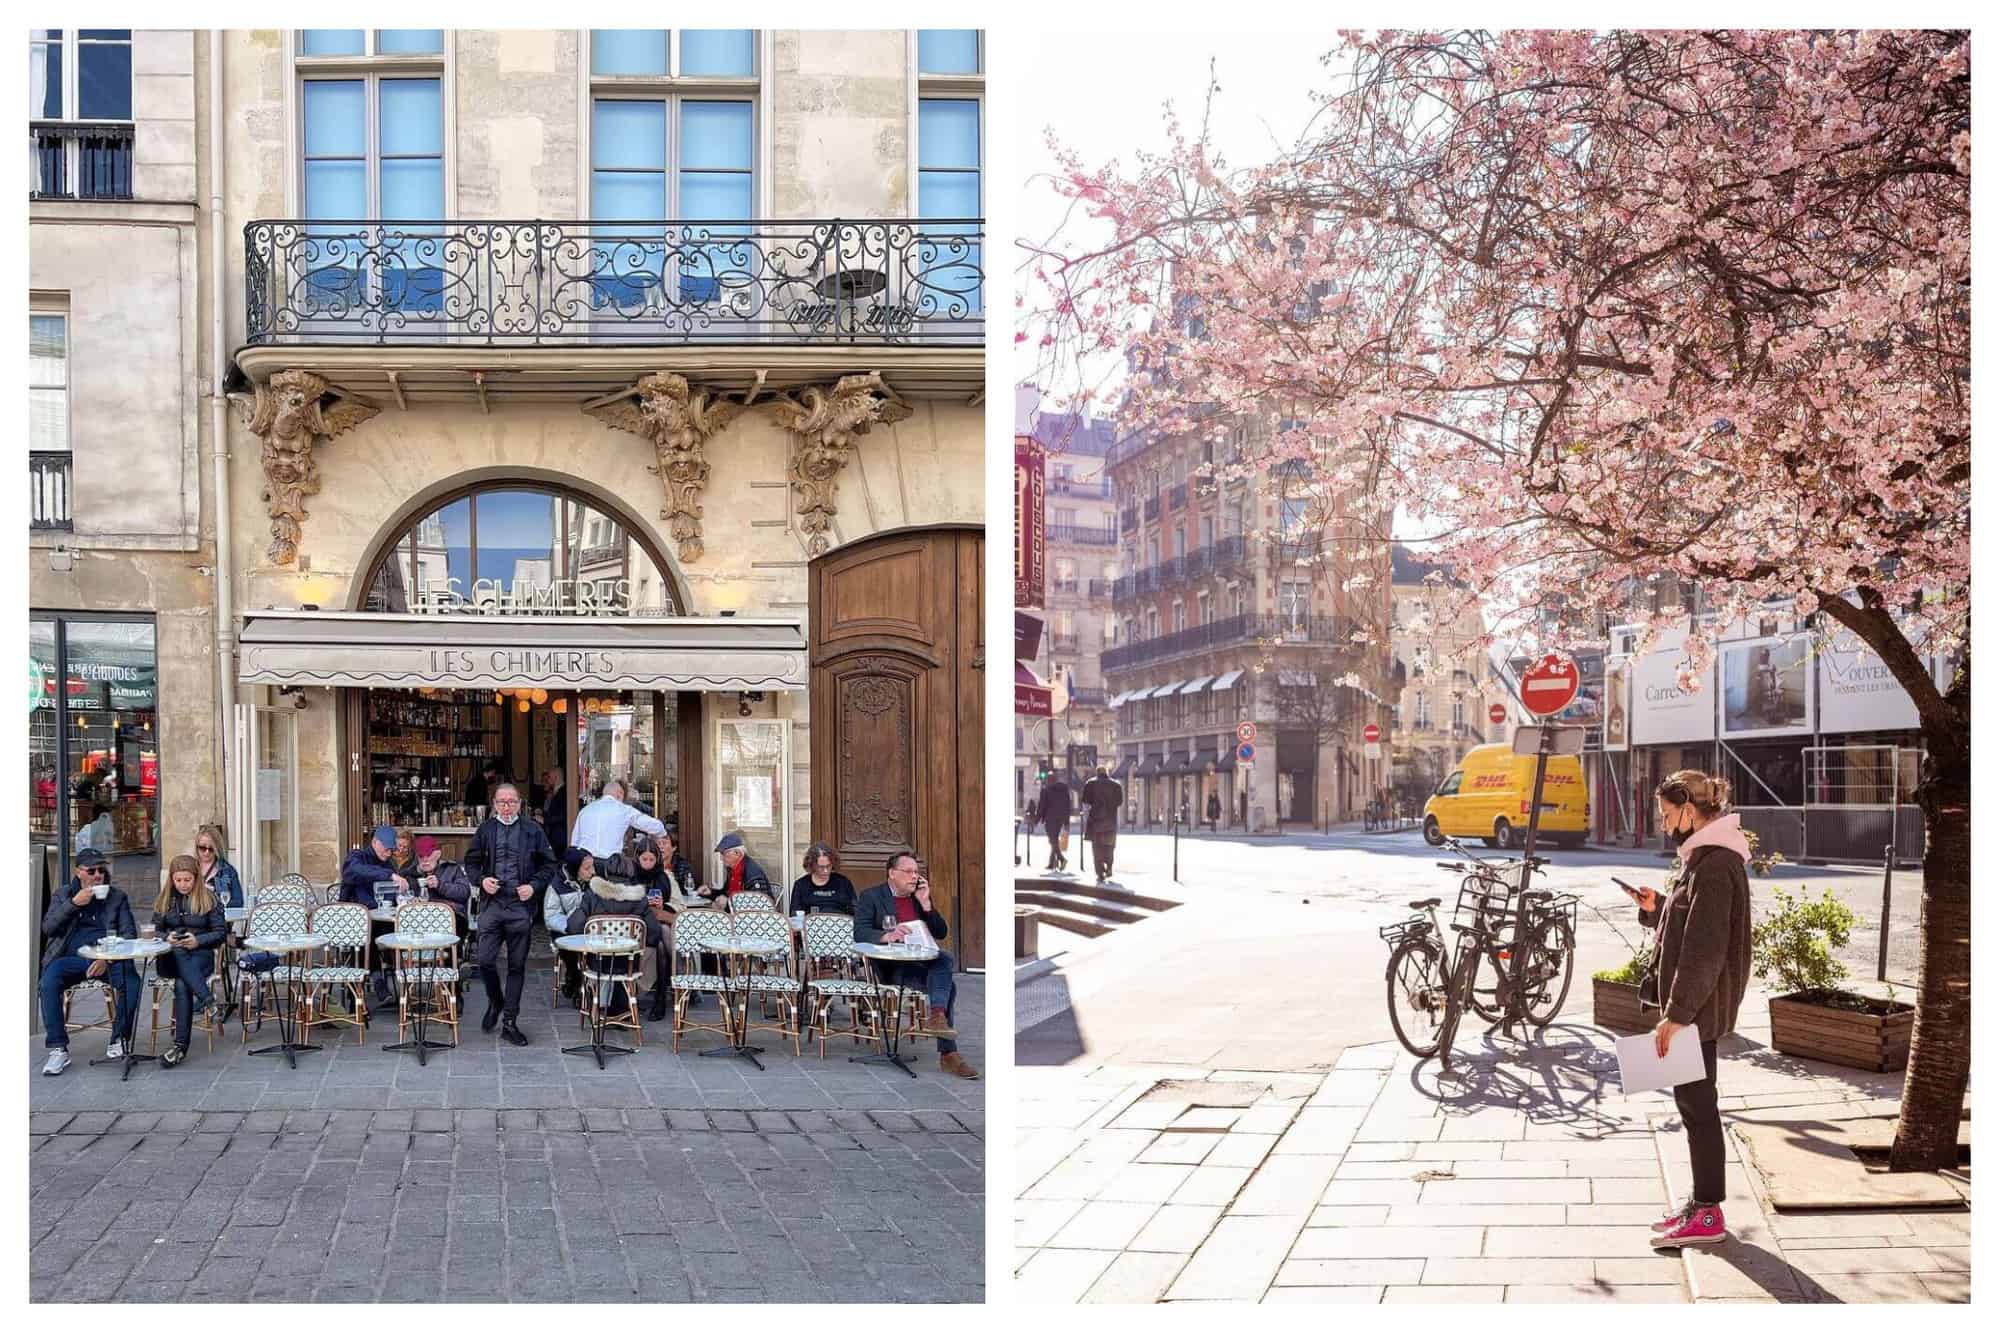 A gentleman leaves the cafe, Les Chimeres as fellow diners sit and drink their coffee. A young lady pauses beneath a cherry blossom in central Paris.